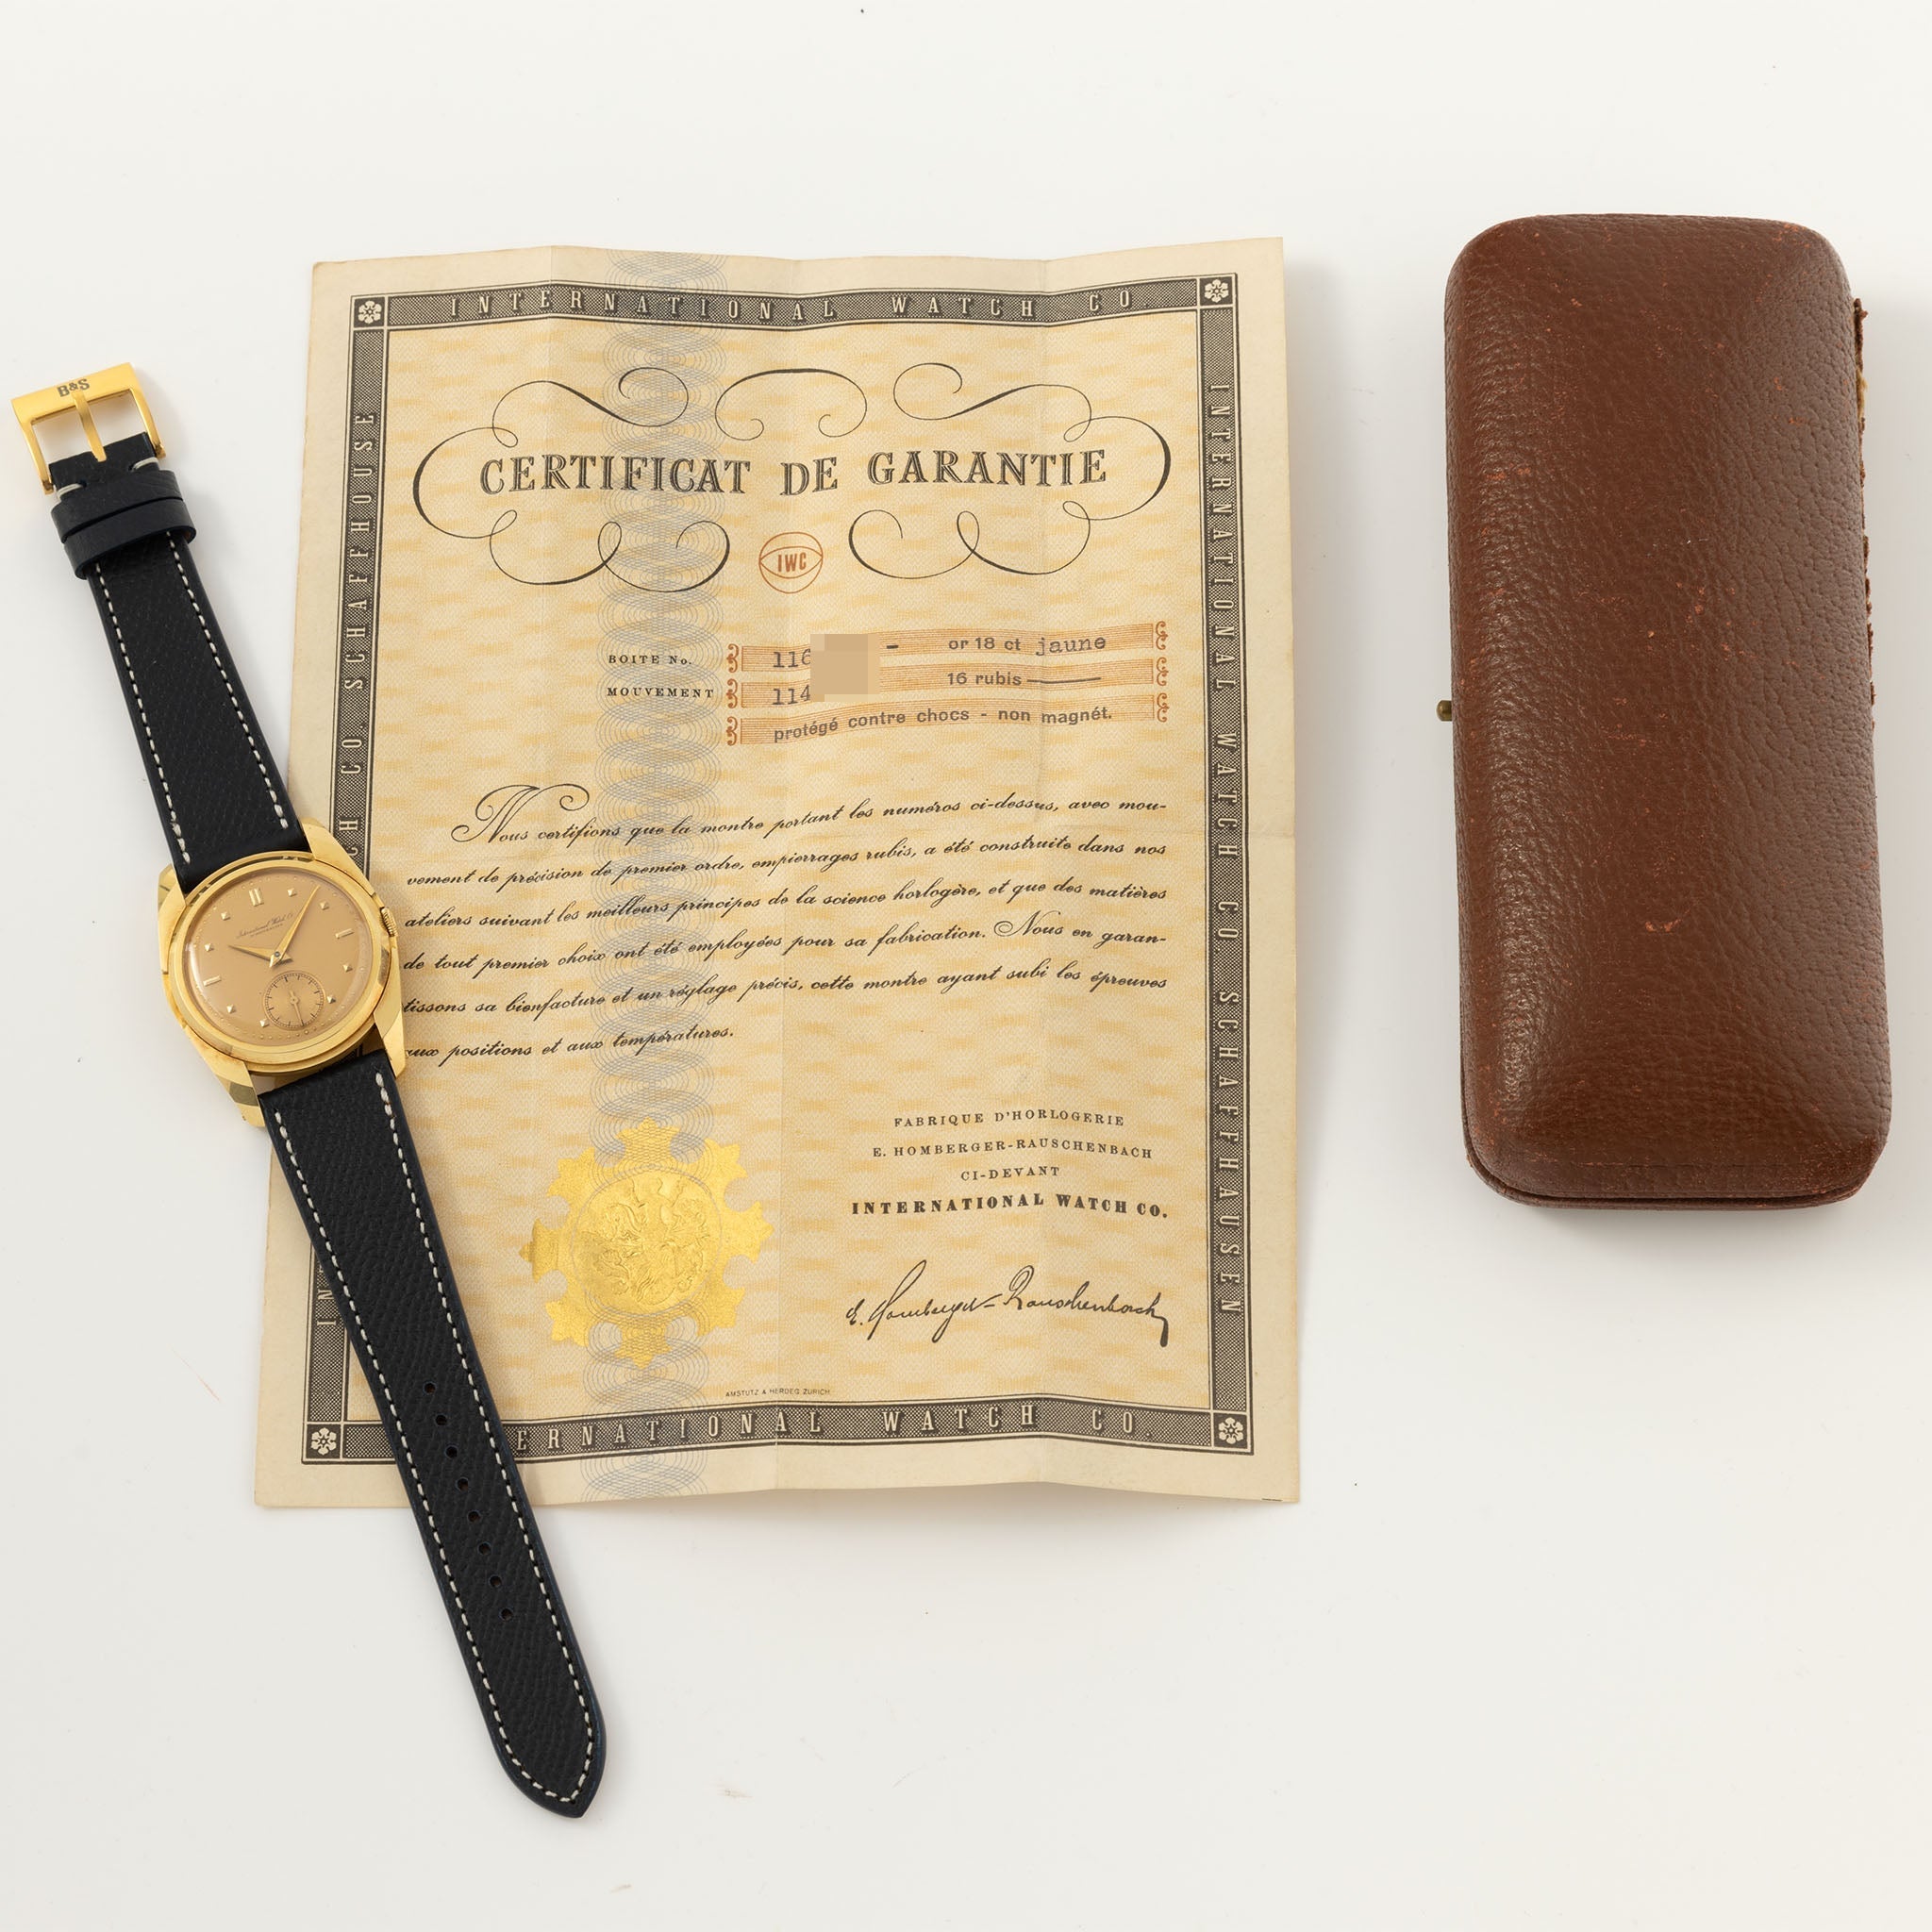 IWC Dresswatch in 18 k yellow gold "UFO " case with box and original guarantee paper